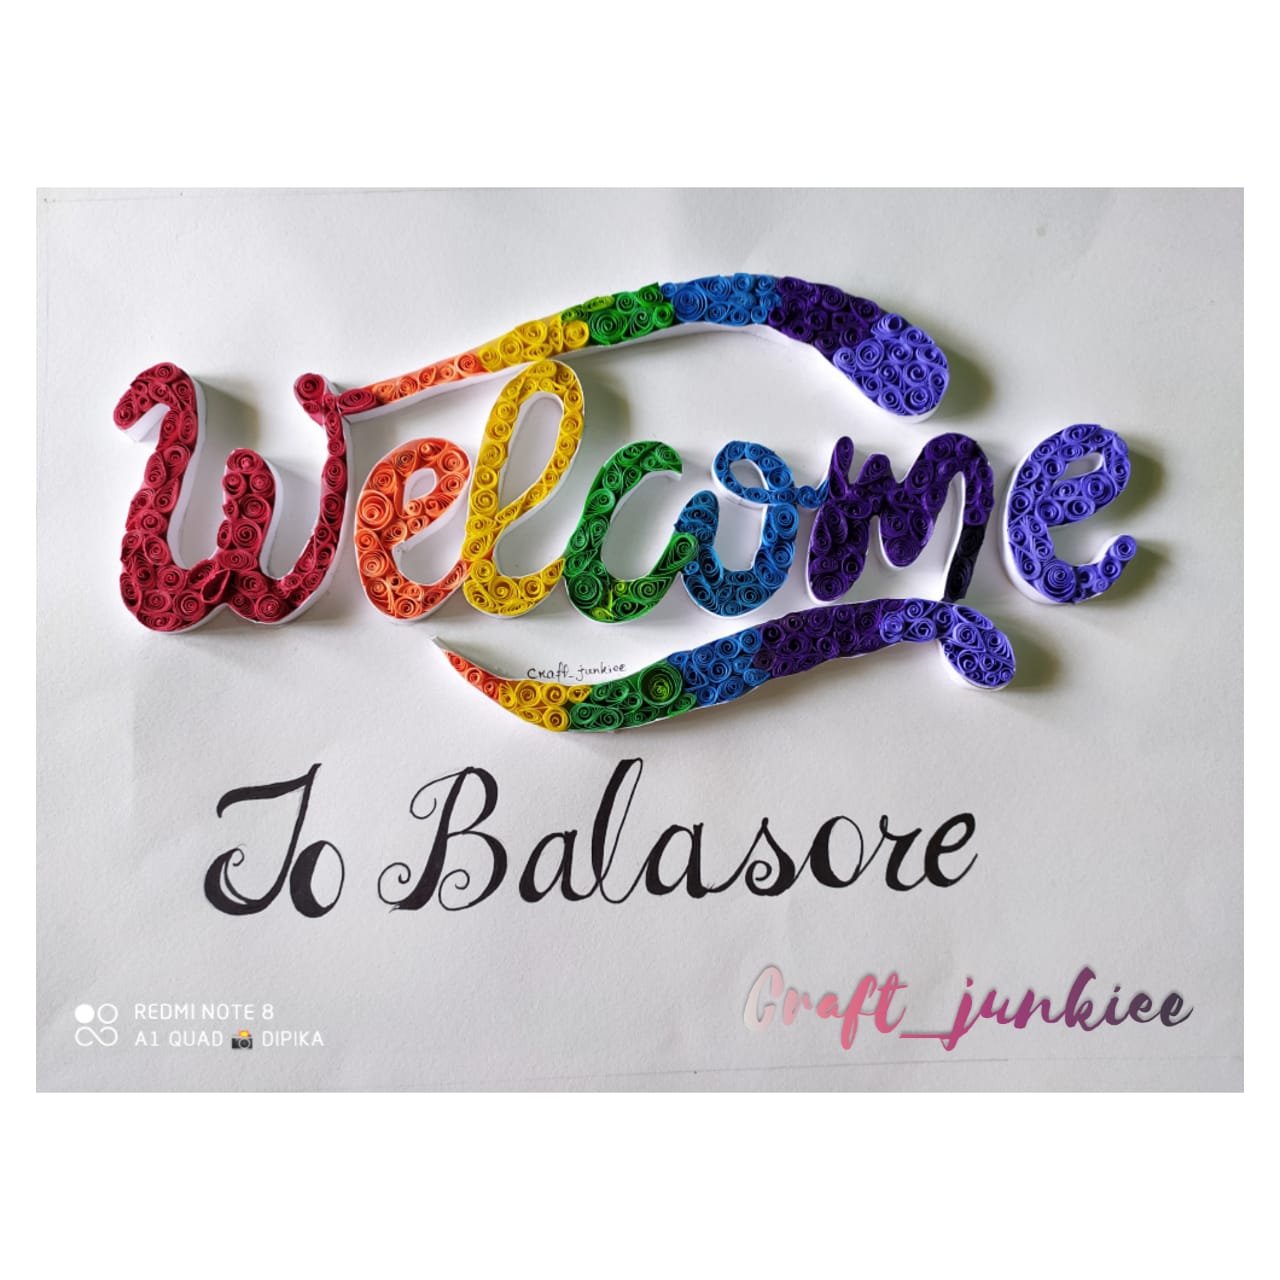 welcome design images